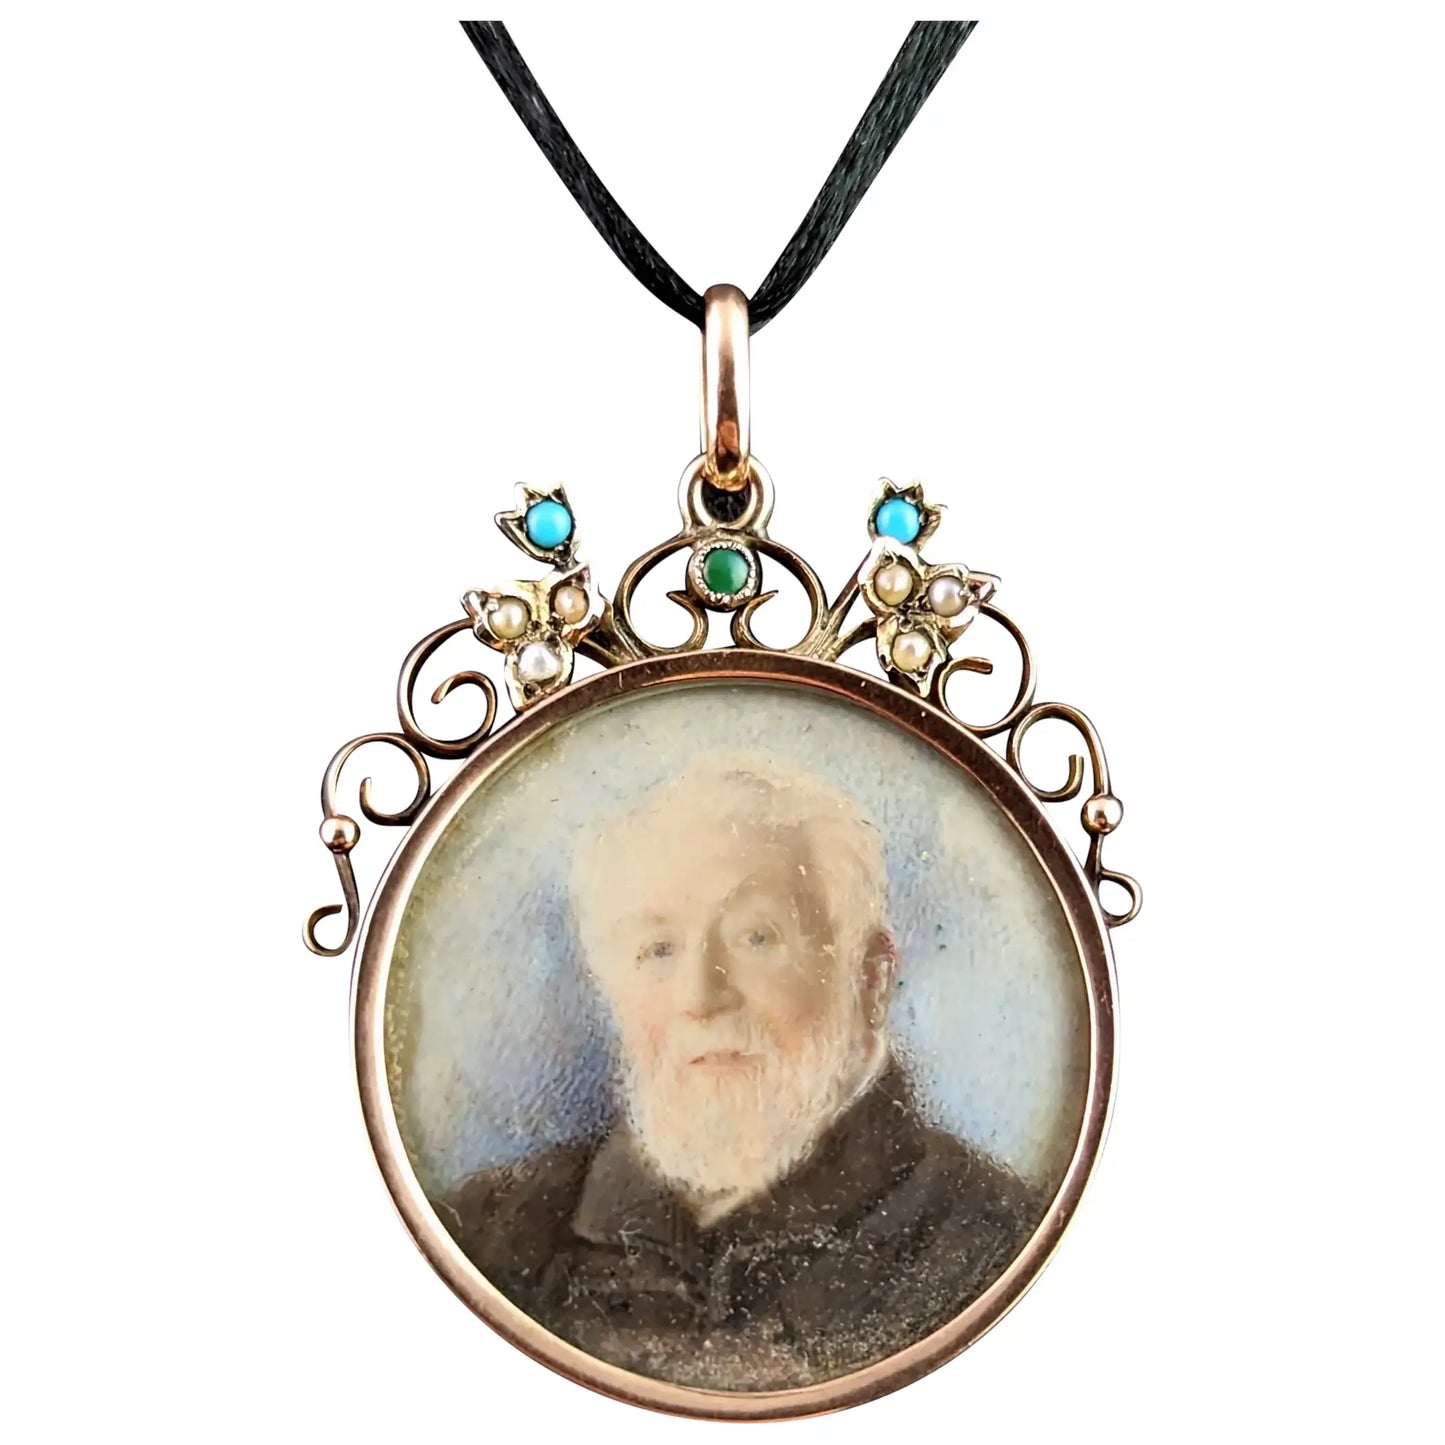 Antique Mourning locket pendant, 9ct gold, portrait, turquoise and pearl